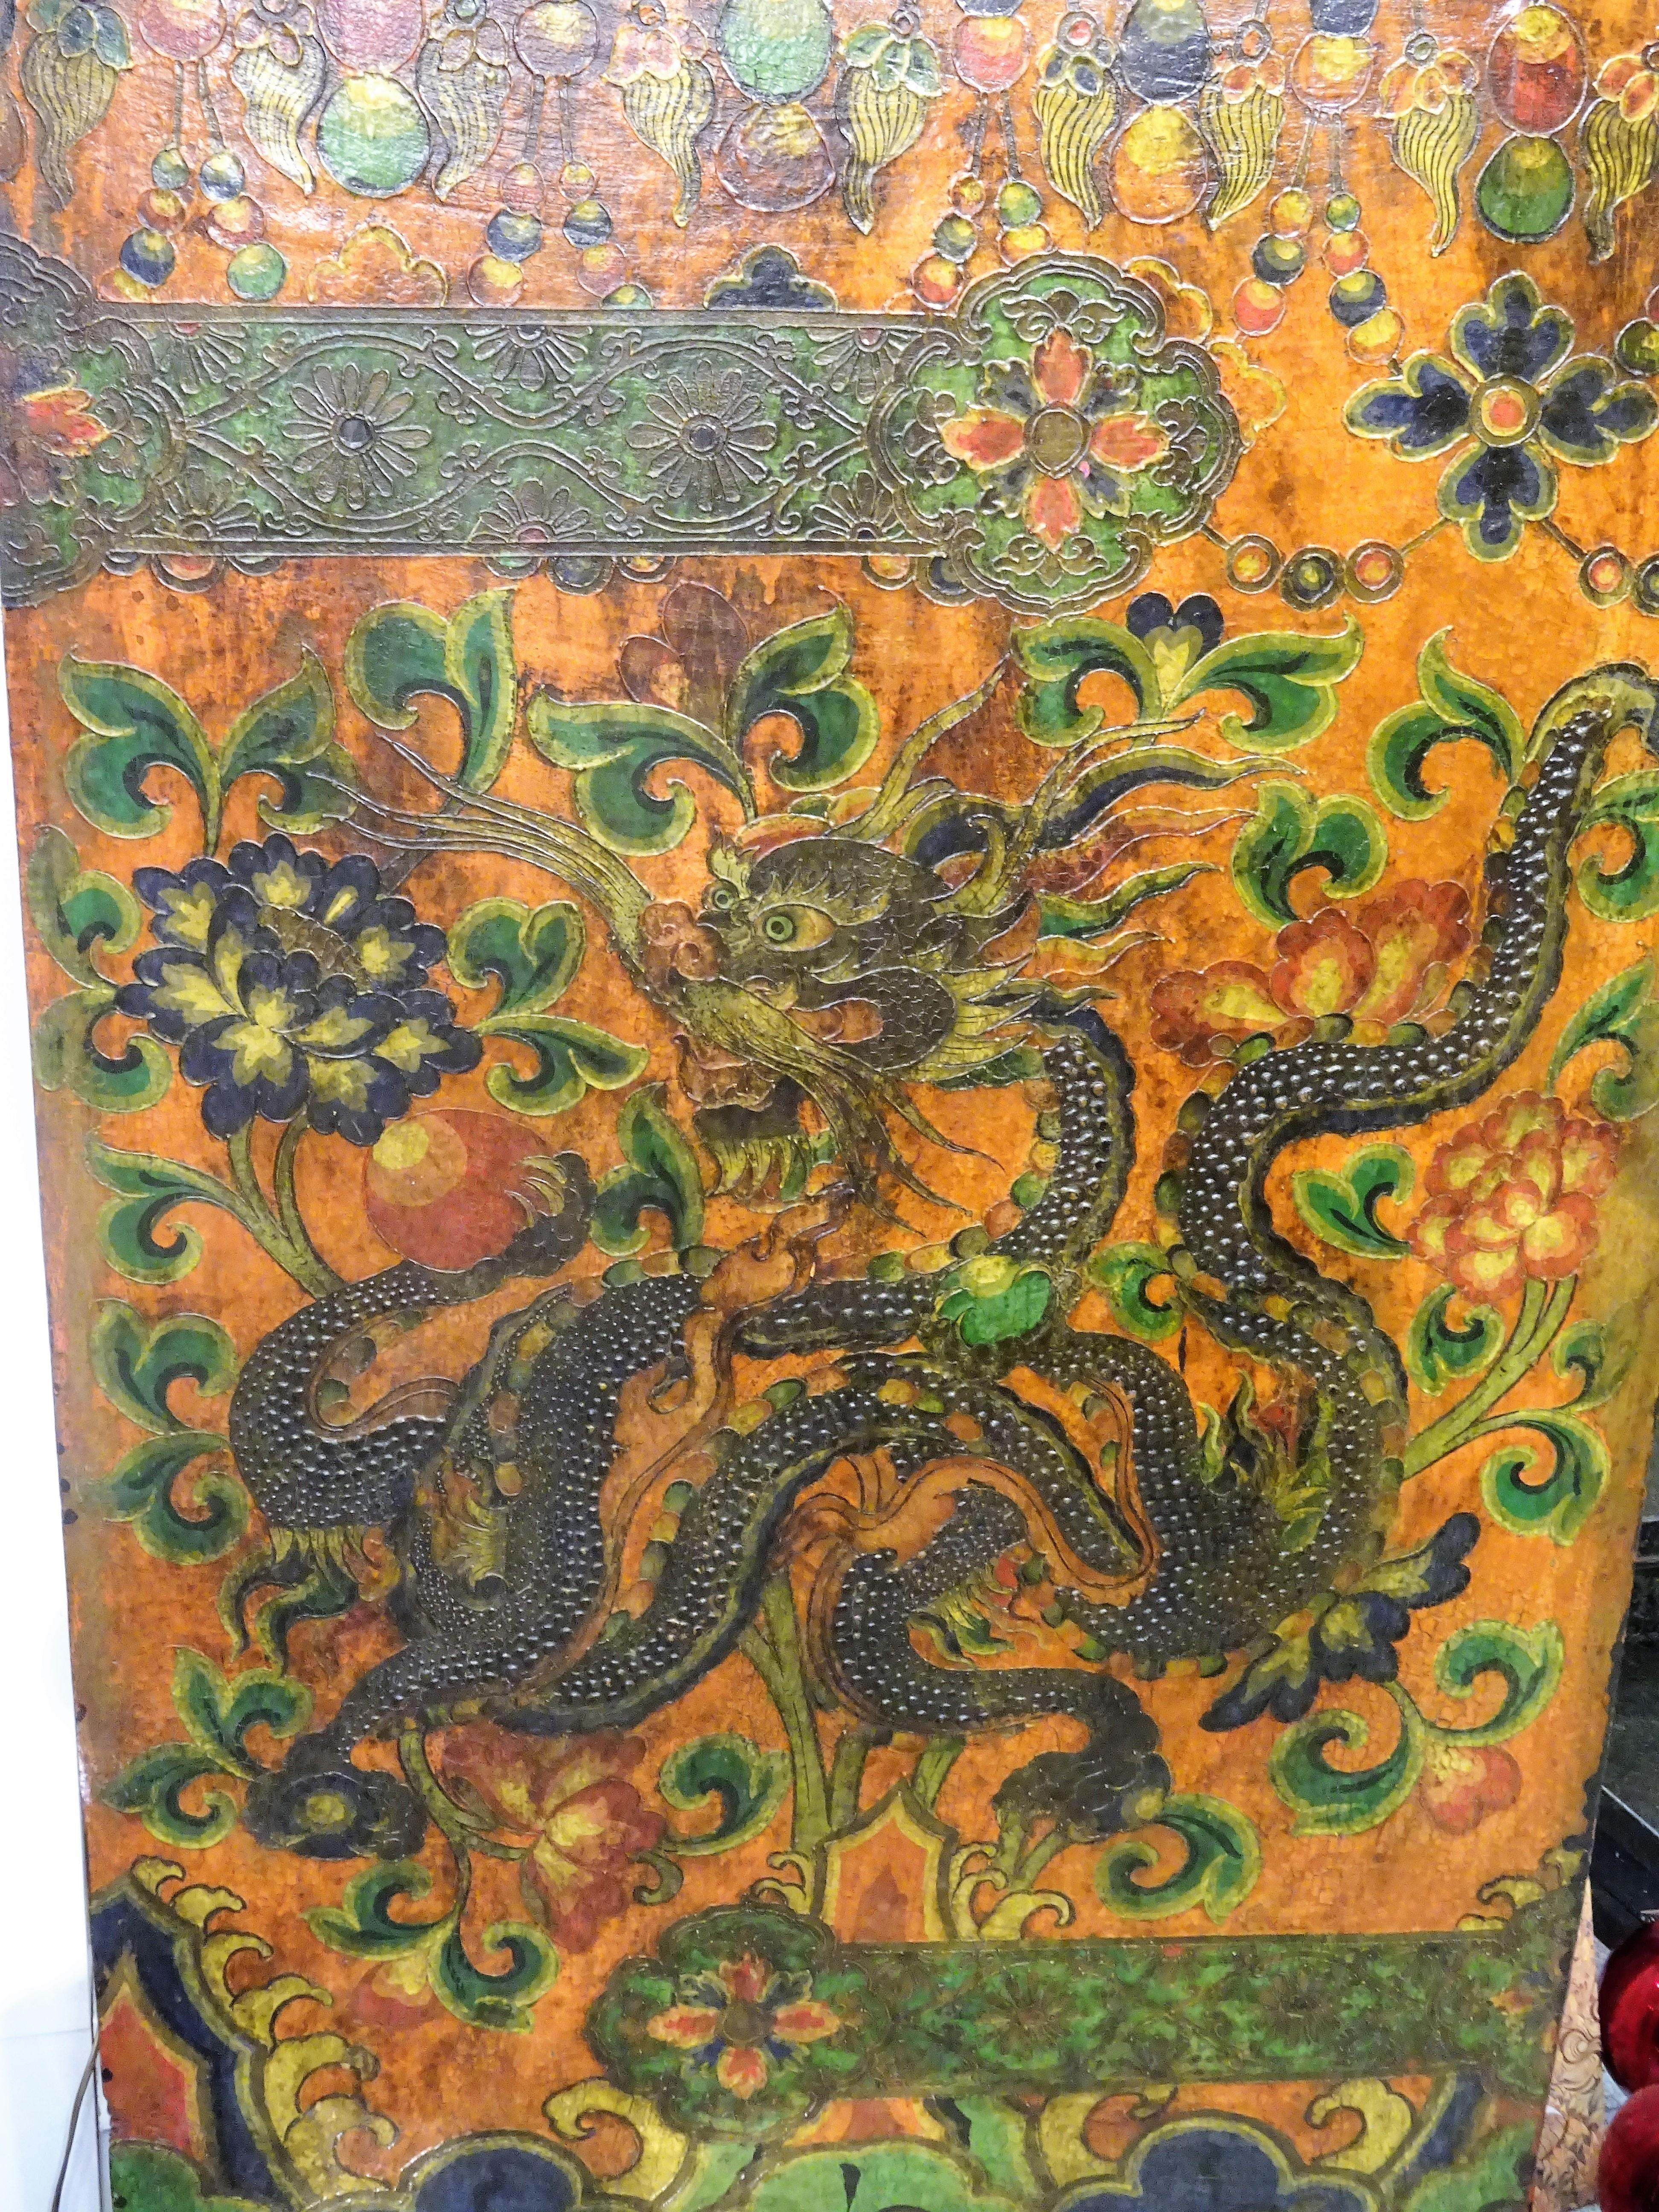 One of a kind Tibetan wooden door on a wooden base as a sculpture, could be hung on the wall too.
On a red backround paprika represents a dragon among camelias and different oriental symbols, hand painted in relief with natural pigments, green, blue